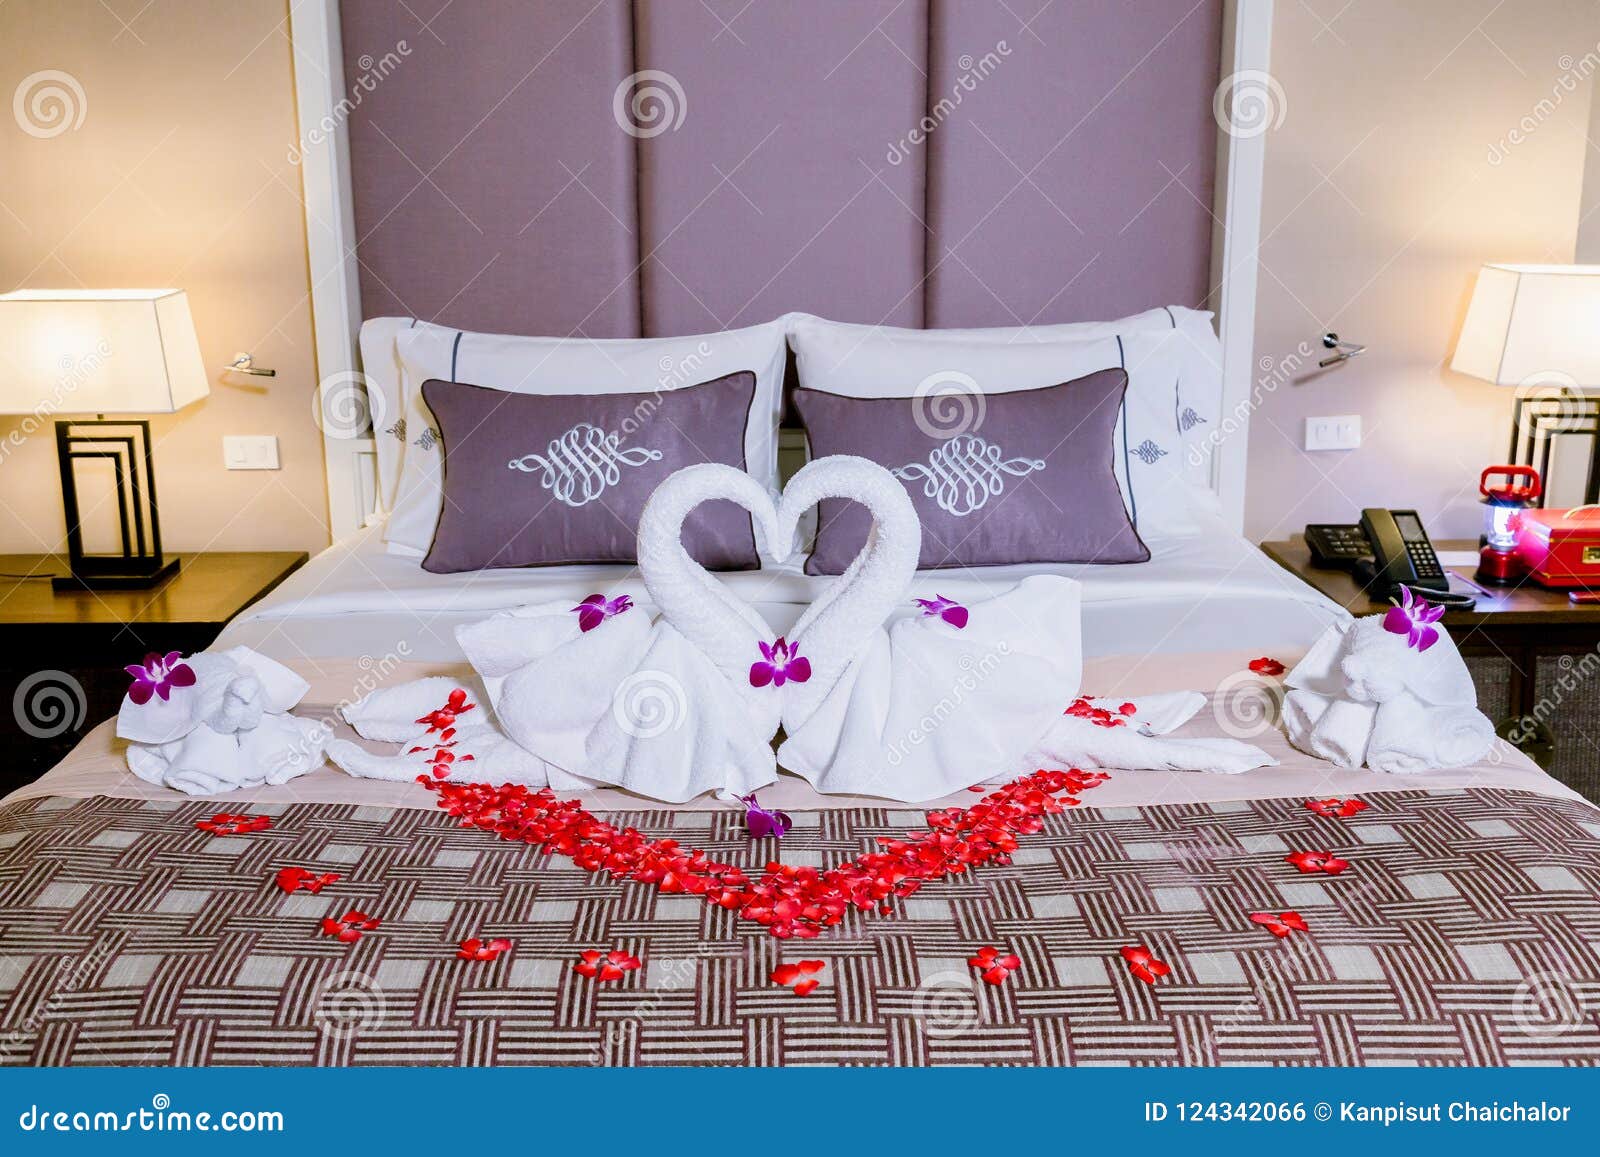 Bed Decoration For Honeymoon - Prepare 2 Party